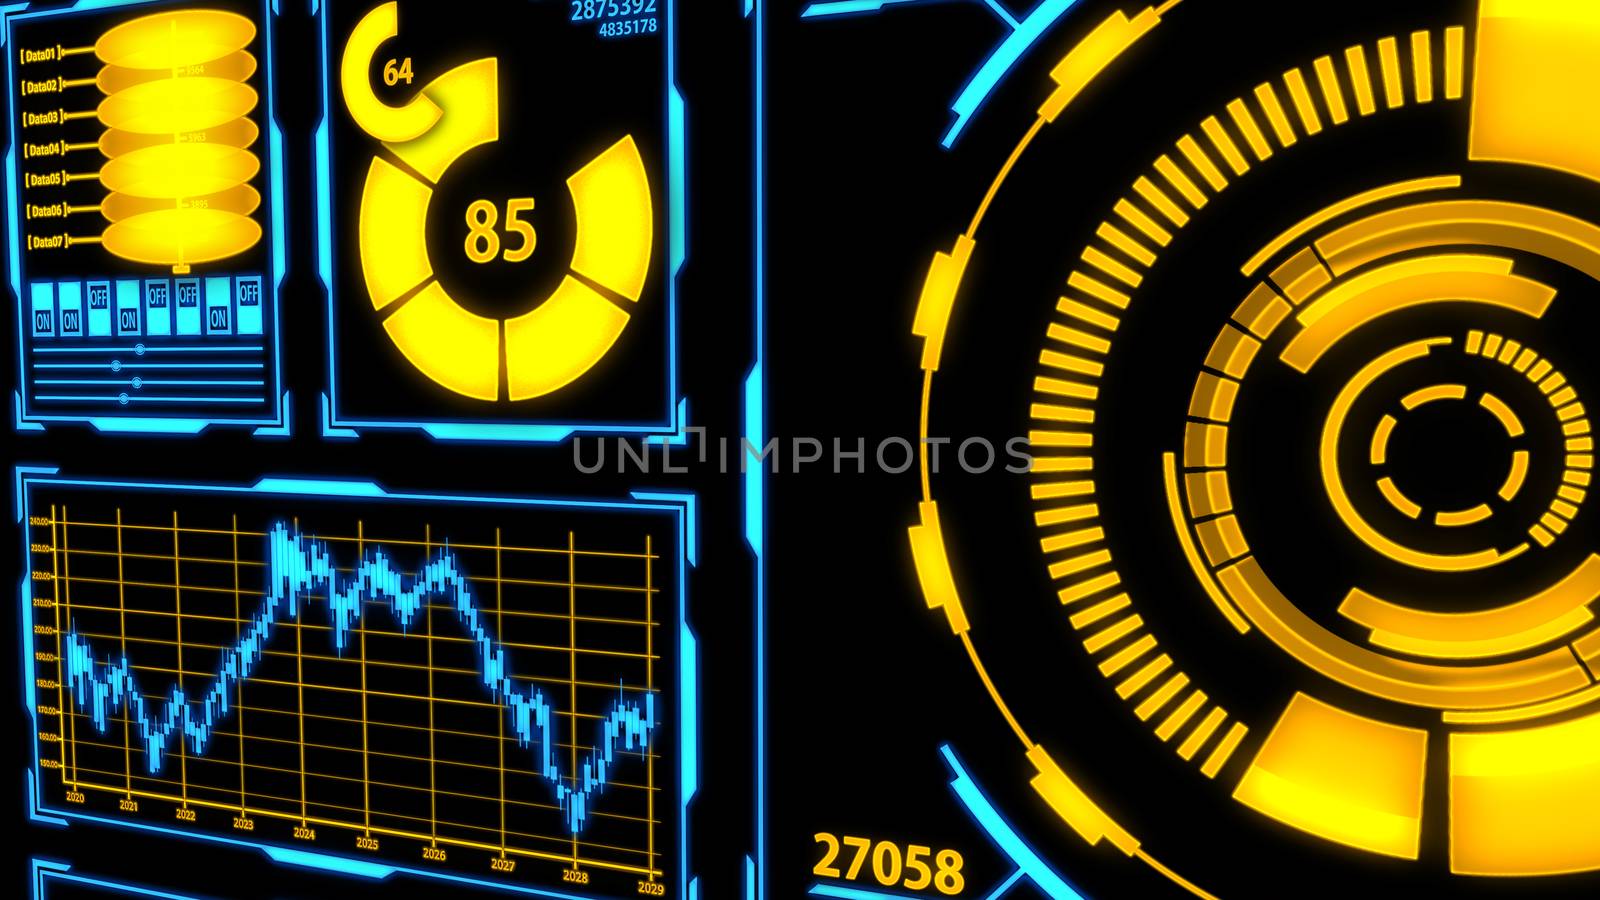 Data Transmission and Digital Transformation Screen with Details in Yellow-Blue color theme including Panels, Graphs, Charts , 3D Earth and digital elements Ver.3 by ariya23156